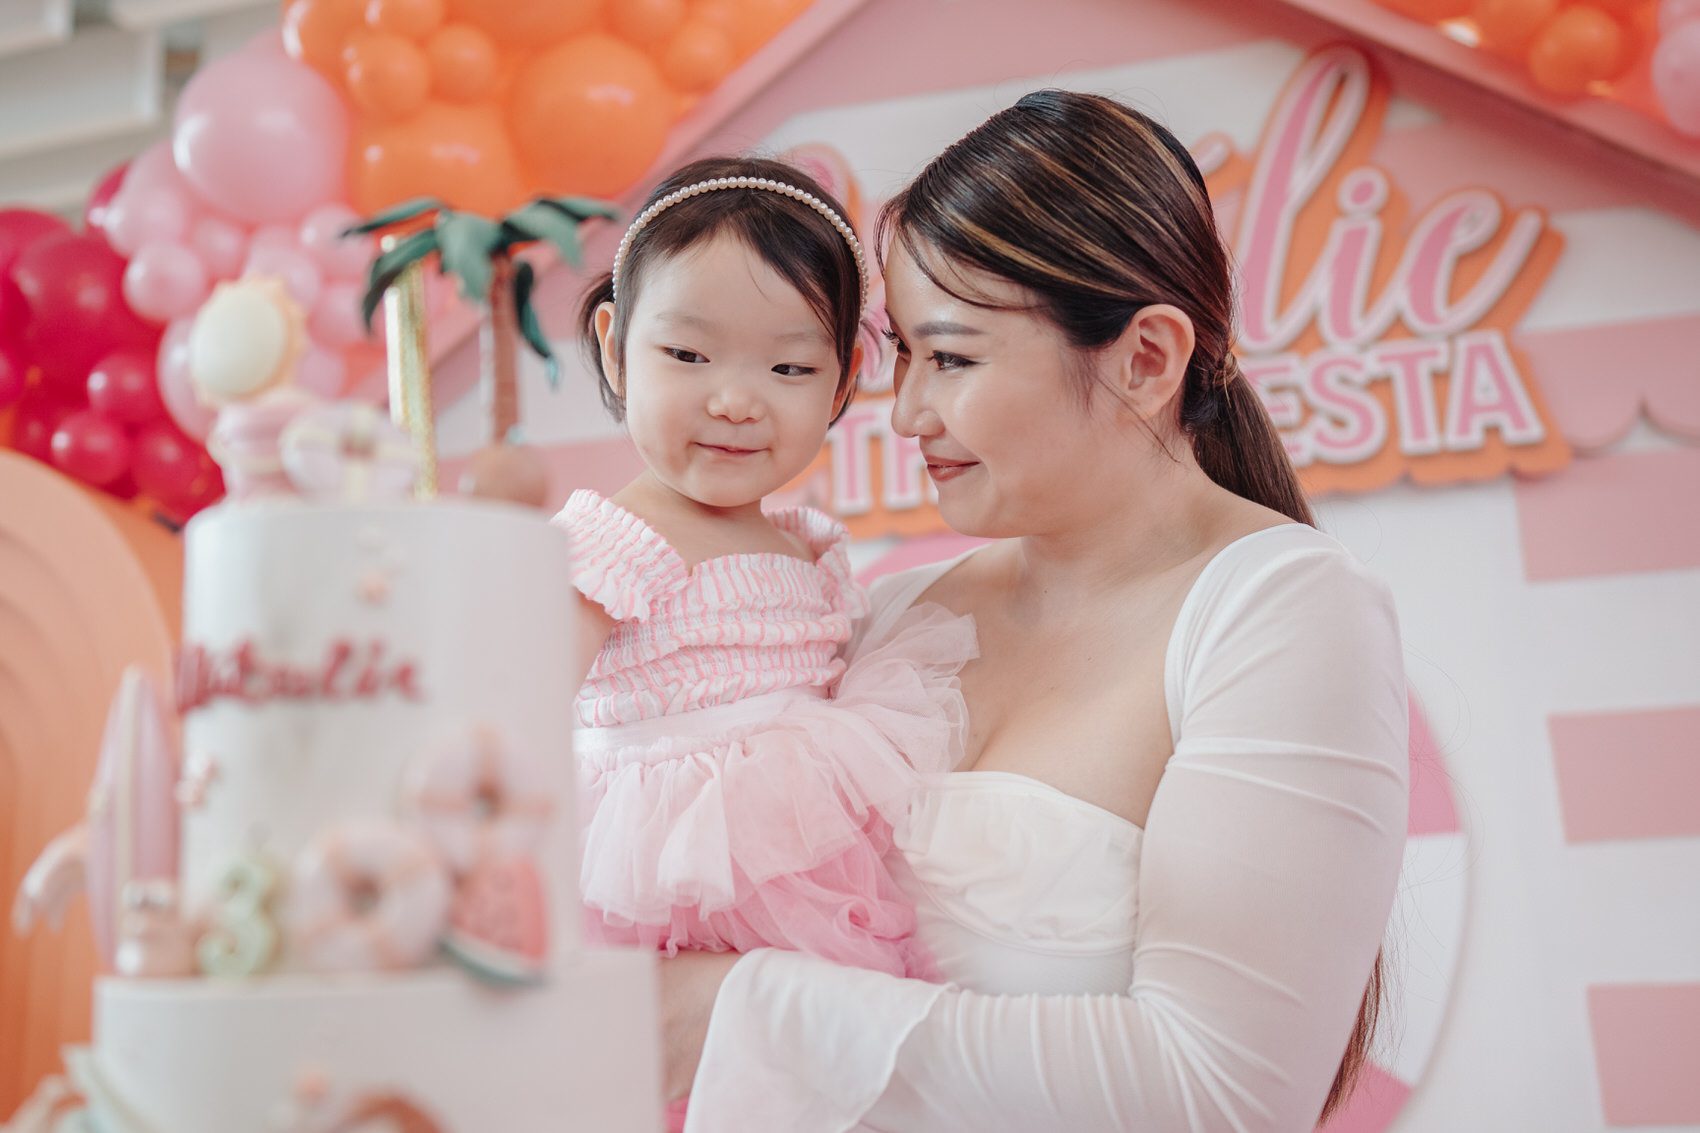 Photo of Natalie and mommy 3 year old birthday party celebration photography at Kuala Lumpur. mermaid pink barbie beach theme. by Cliff Choong Photography